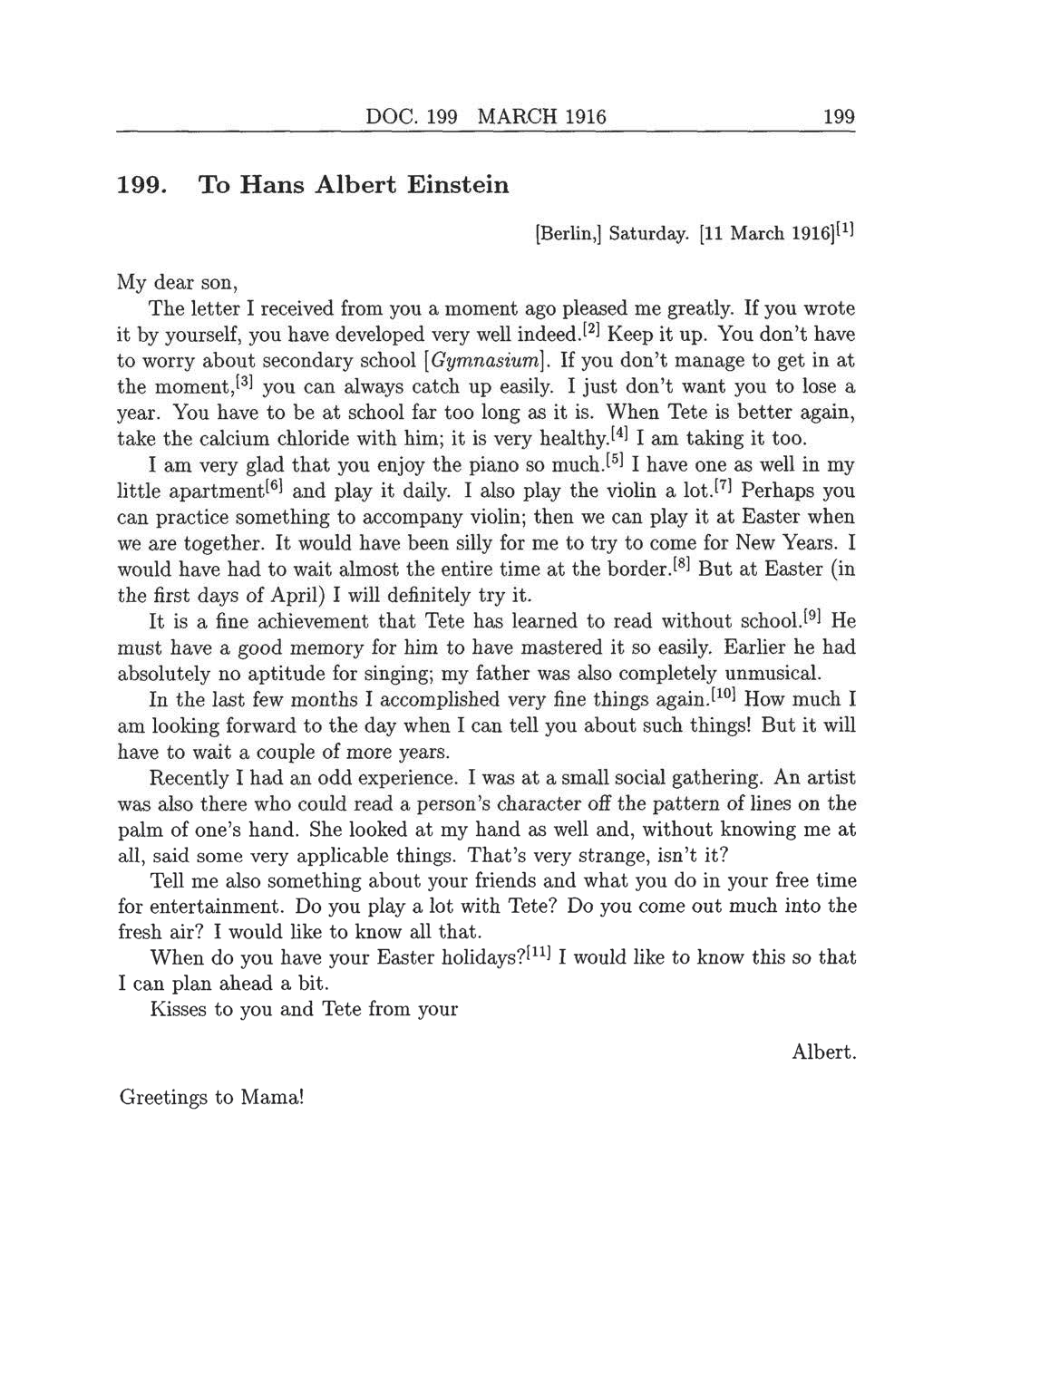 Volume 8: The Berlin Years: Correspondence, 1914-1918 (English translation supplement) page 199